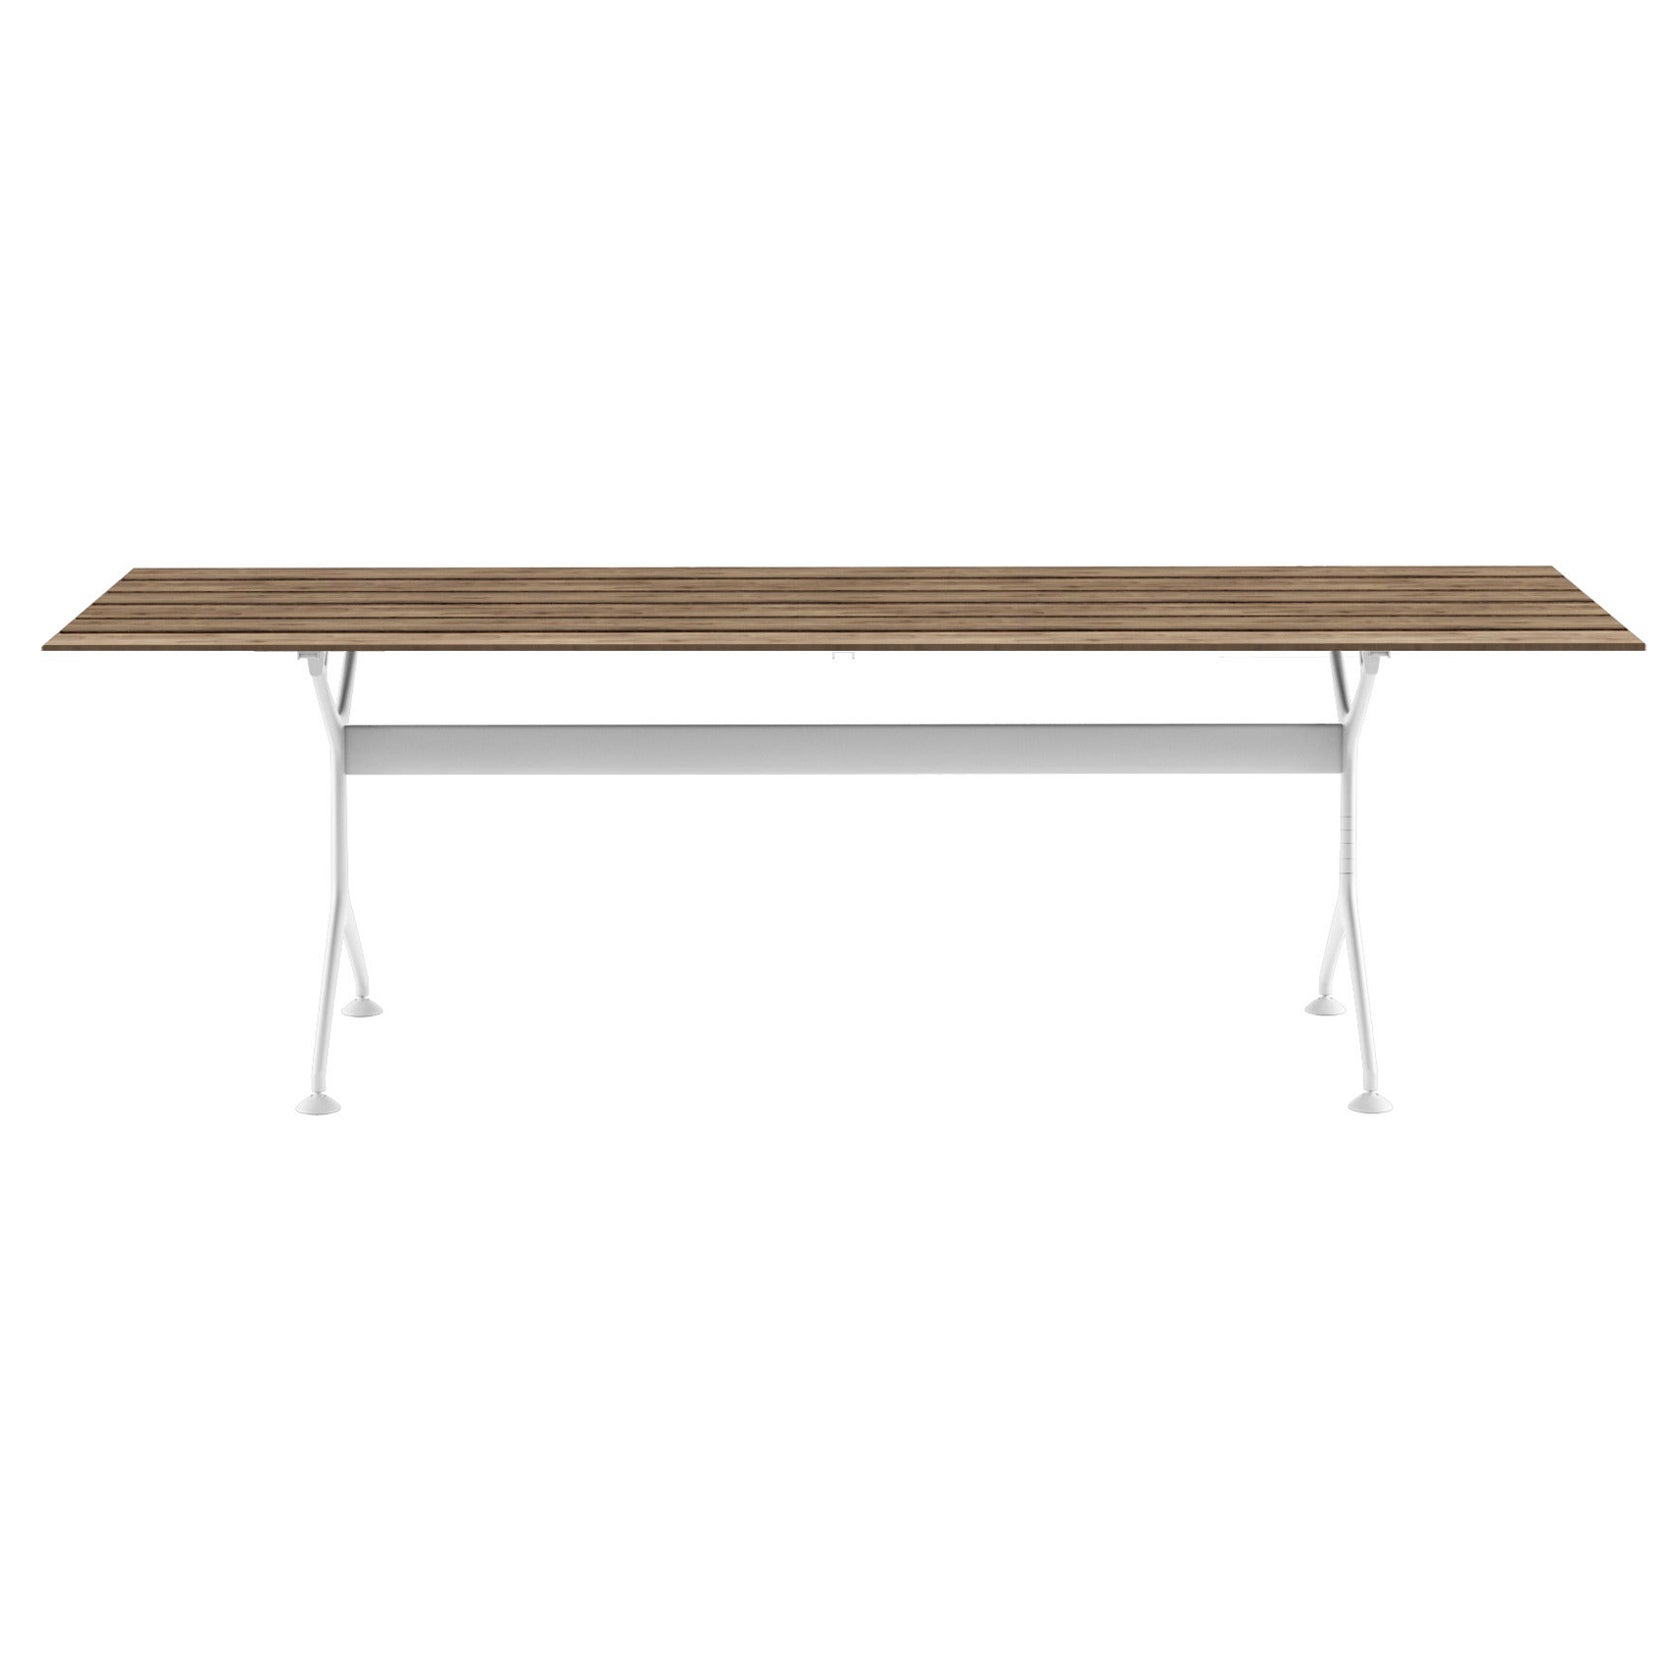 Alias M24 Tech Wood Outdoor Table 240 in Ash and Lacquered Aluminium Frame